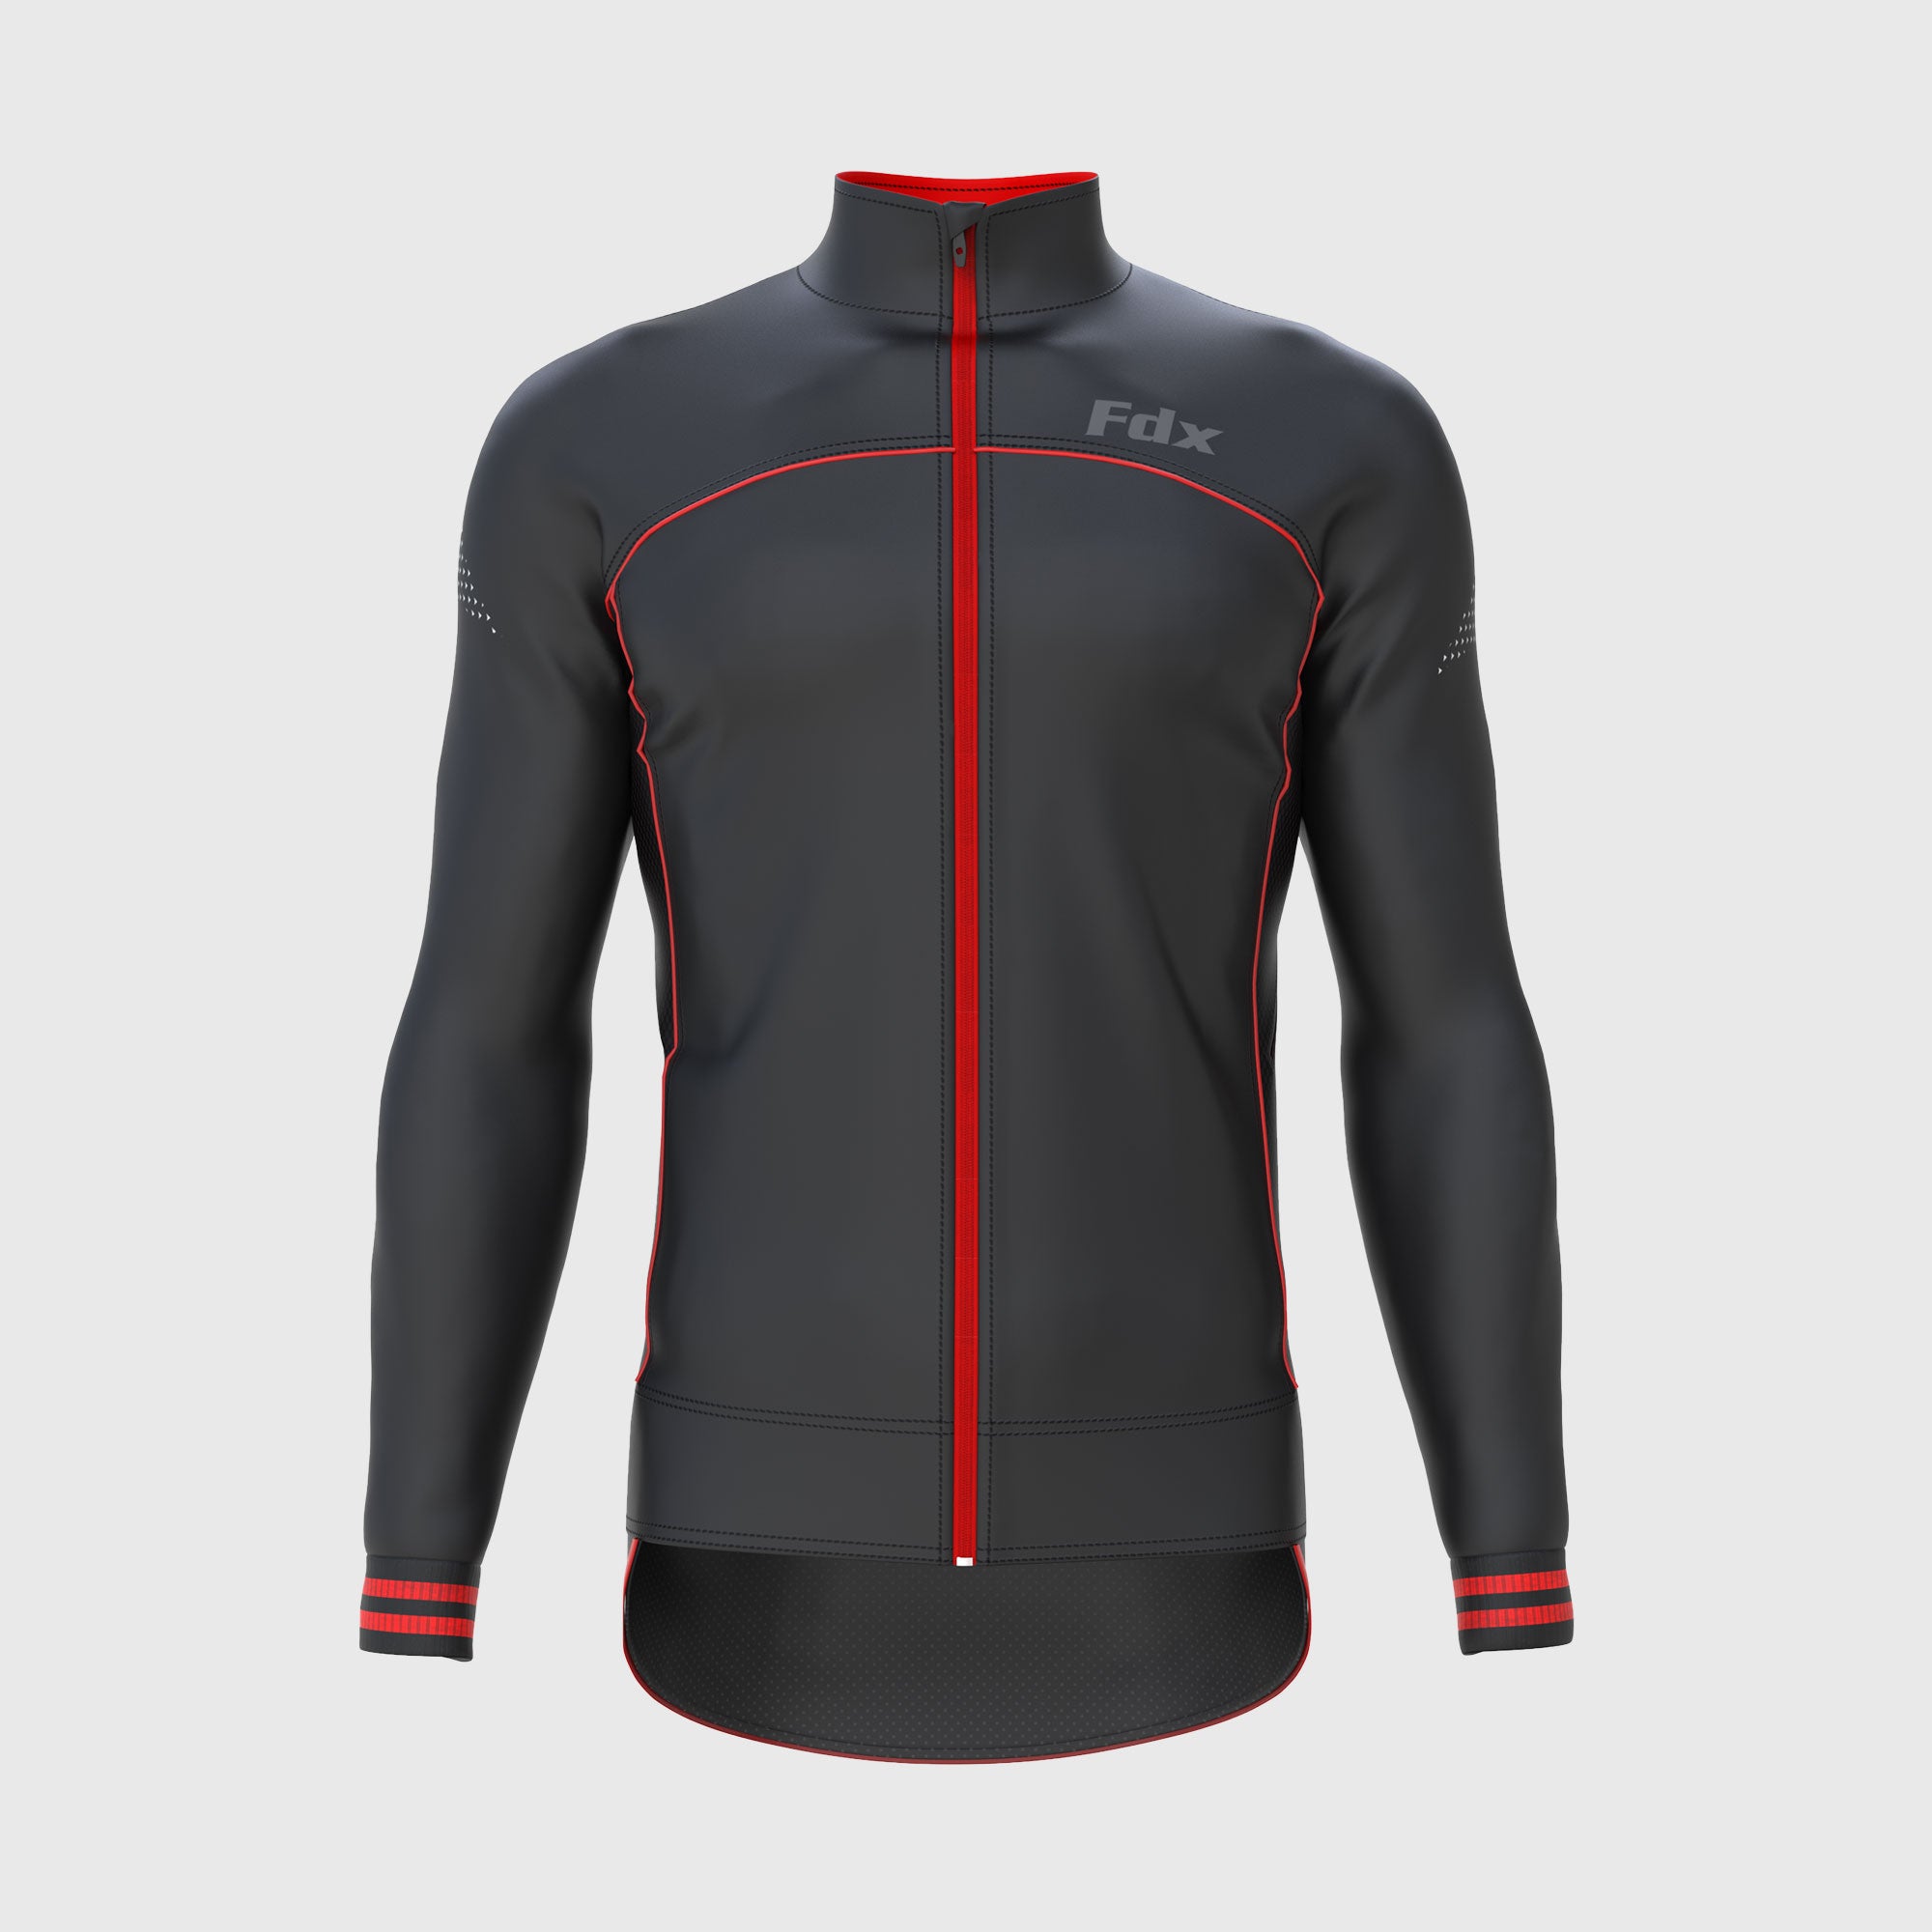 Fdx Mens Black & Red Cycling Jacket for Winter Thermal Casual Softshell Clothing Lightweight, Windproof, Waterproof & Pockets - Apollux